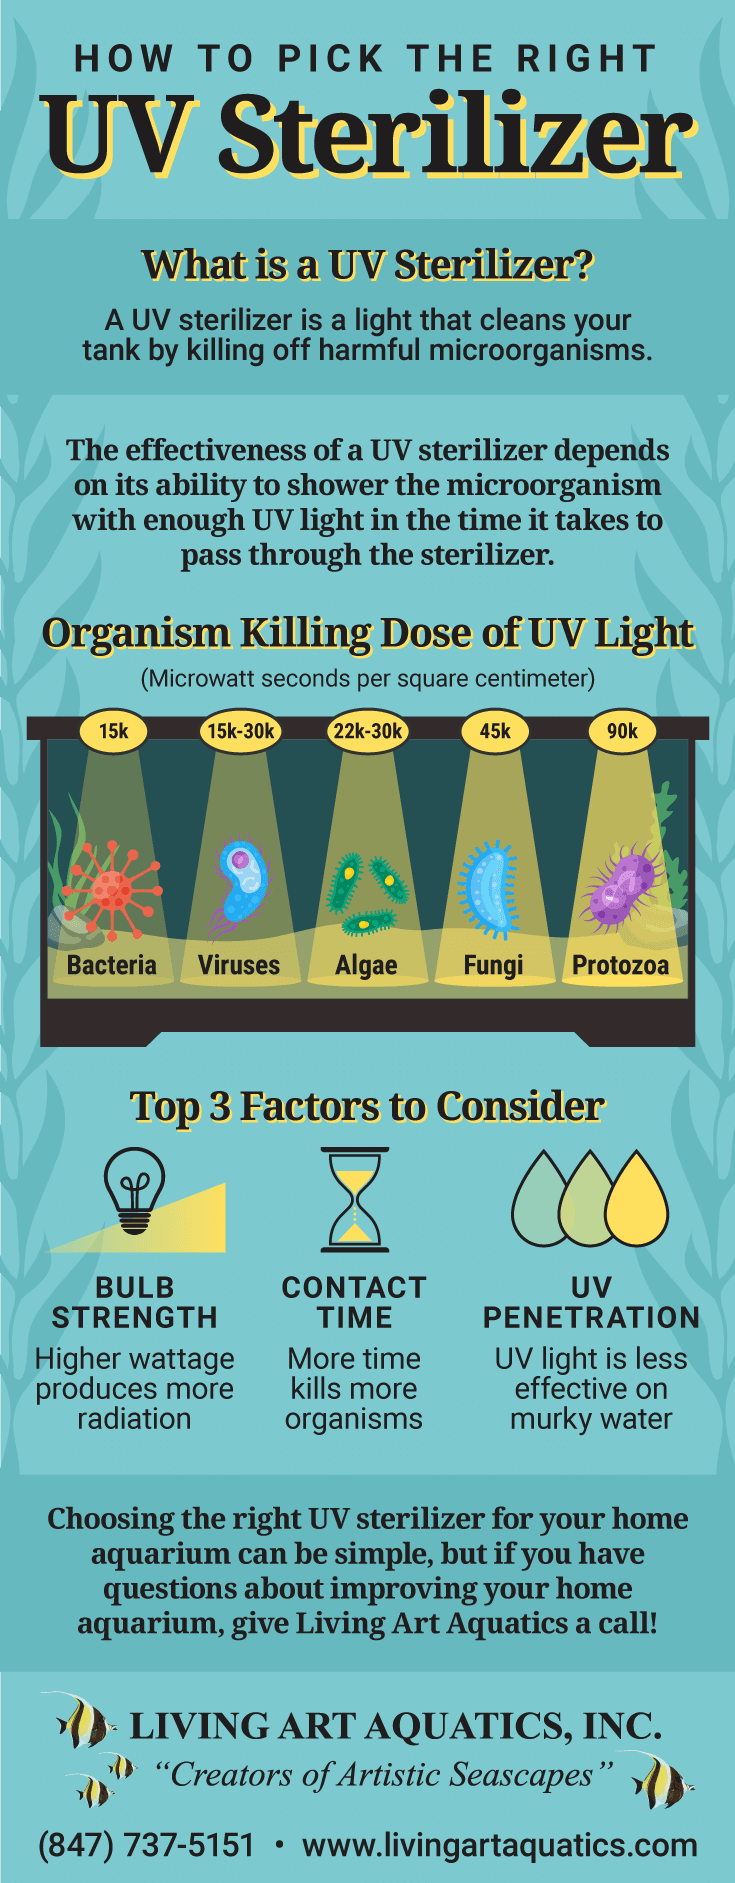 Image of the different benefits of UV Sterilization lights for your aquarium.